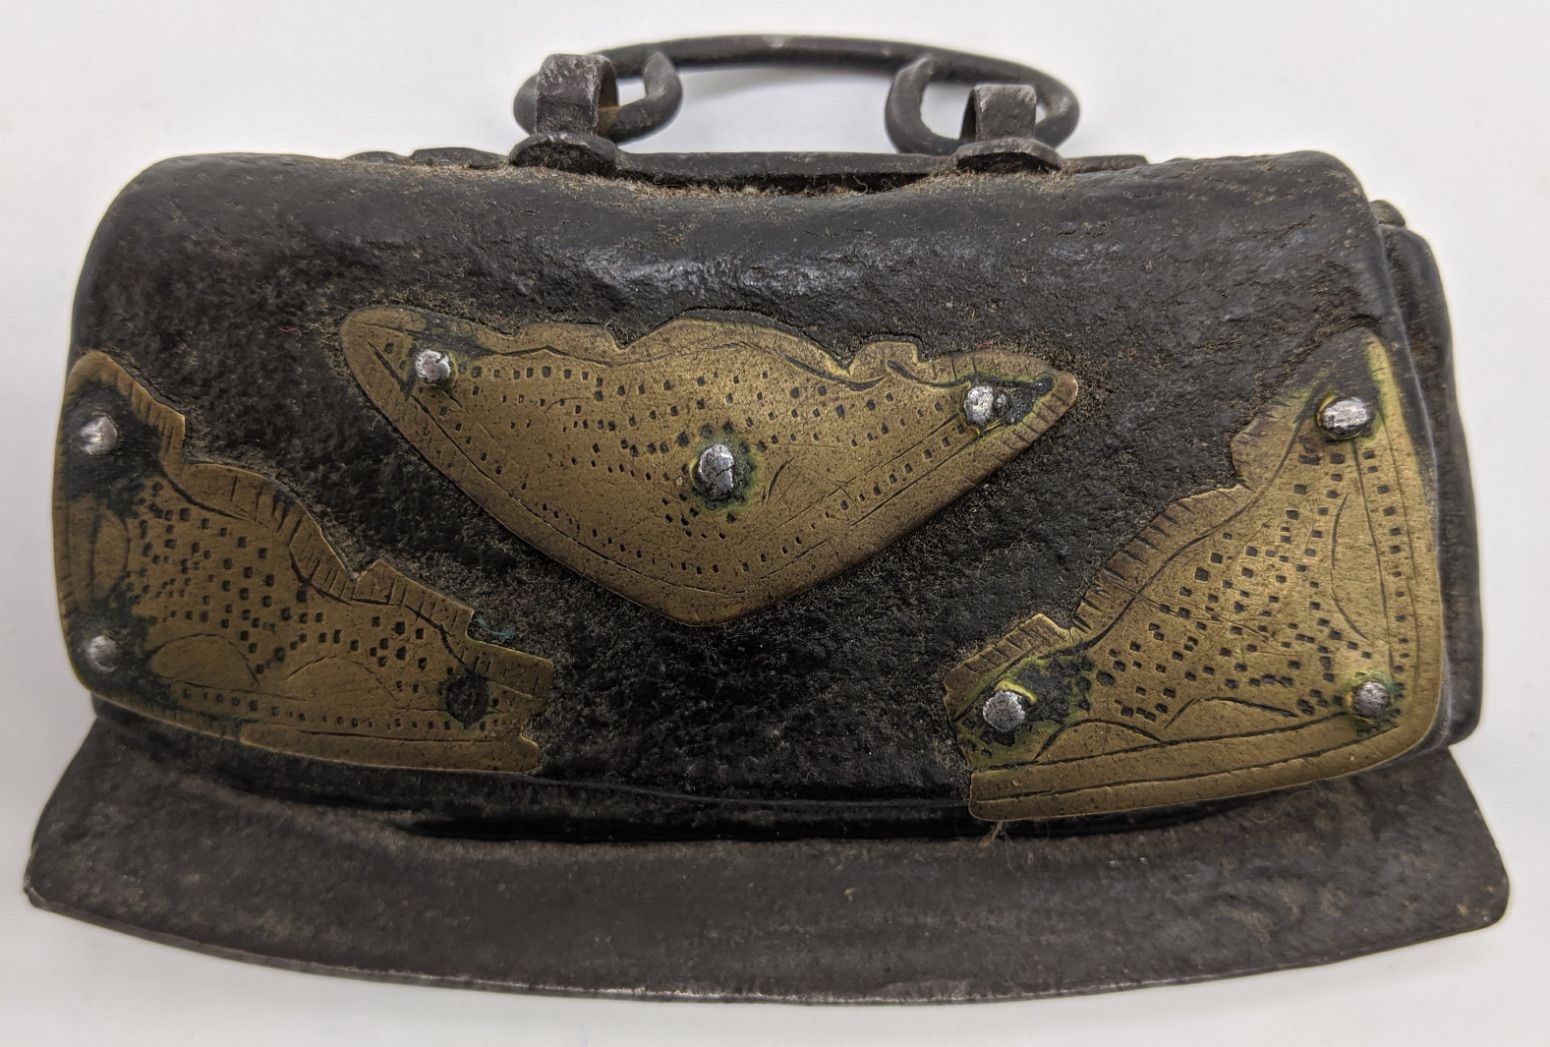 A Tibetan leather tinder pouch and striker (Icag) with brass mounts, L.10cm